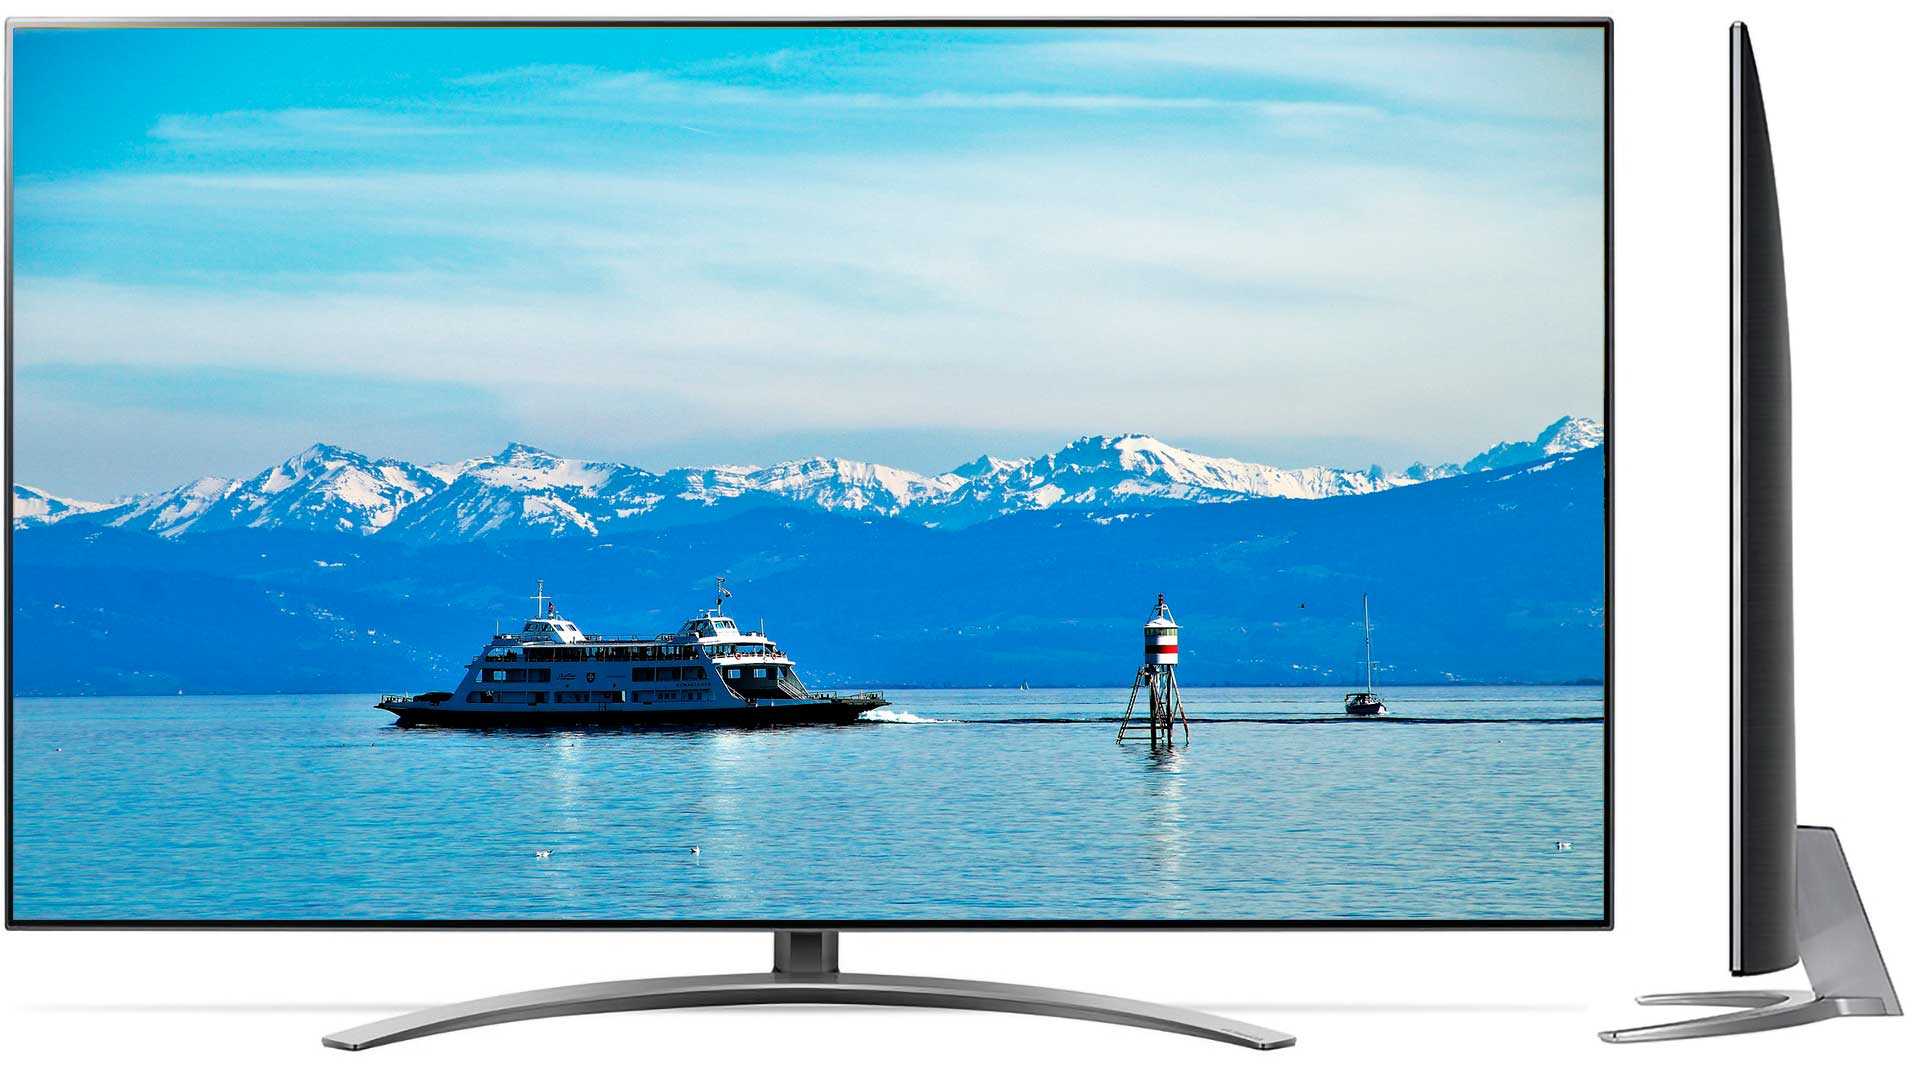 Specifications of lg 24mt35s